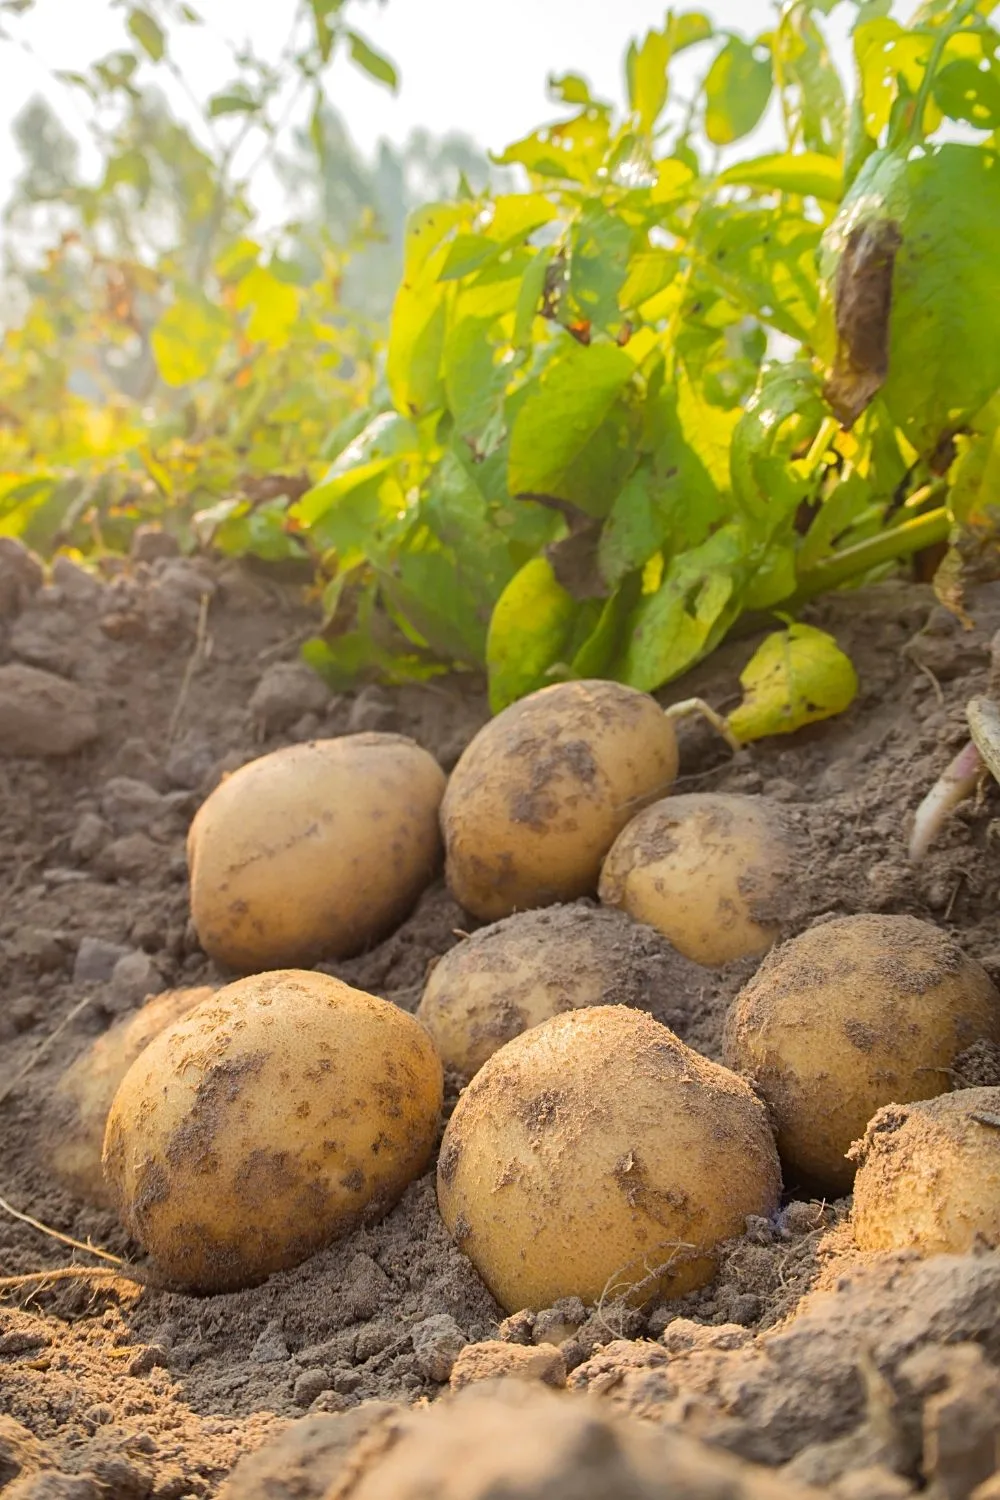 Potatoes grow well in raised beds with acidic soil